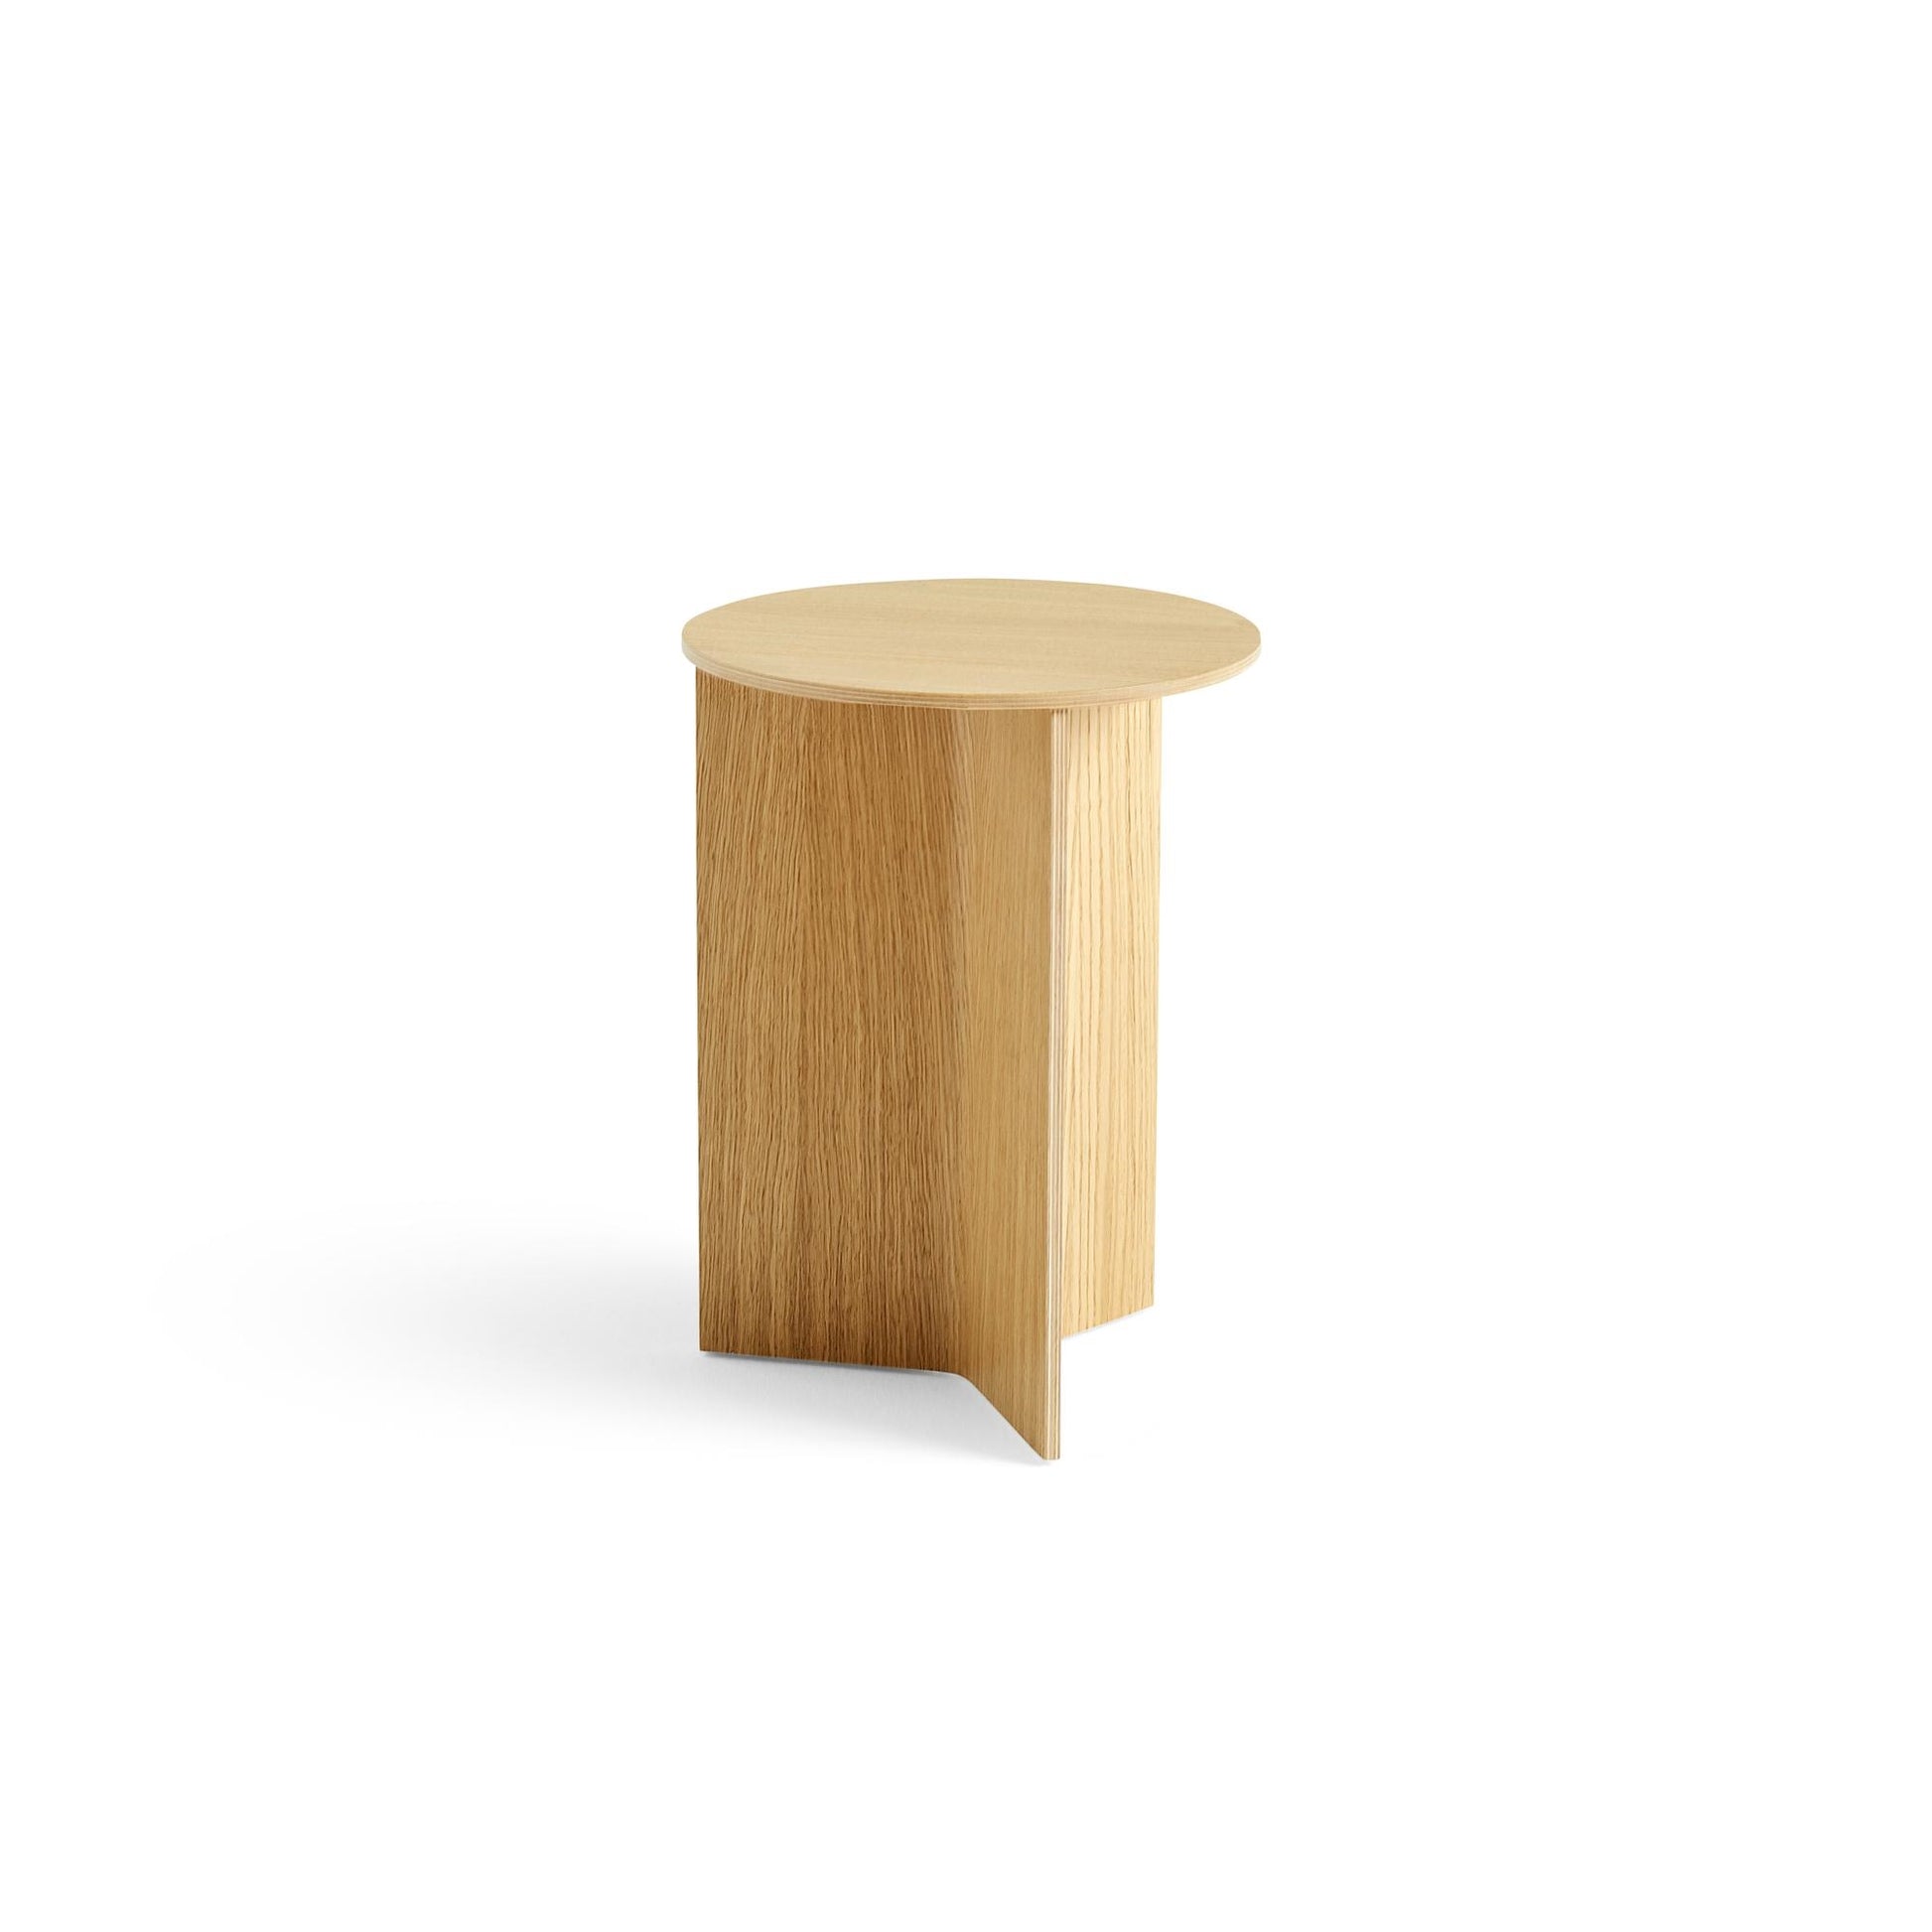 Slit Wood Coffee Table Round Ø35 by HAY #Lacquered Oak